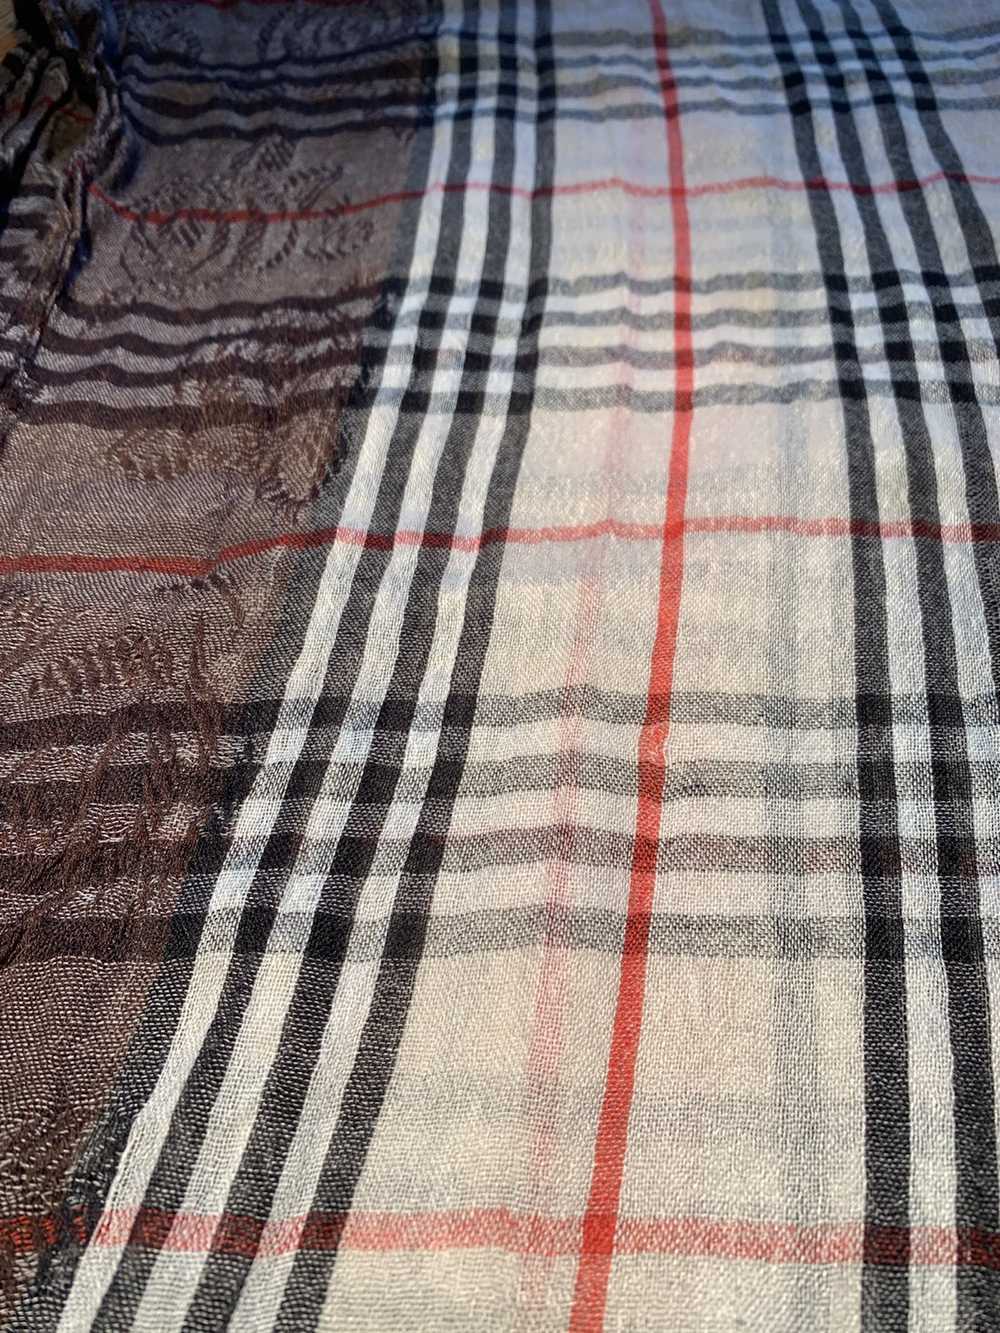 Burberry Rare double pattern Burberry scarf - image 2